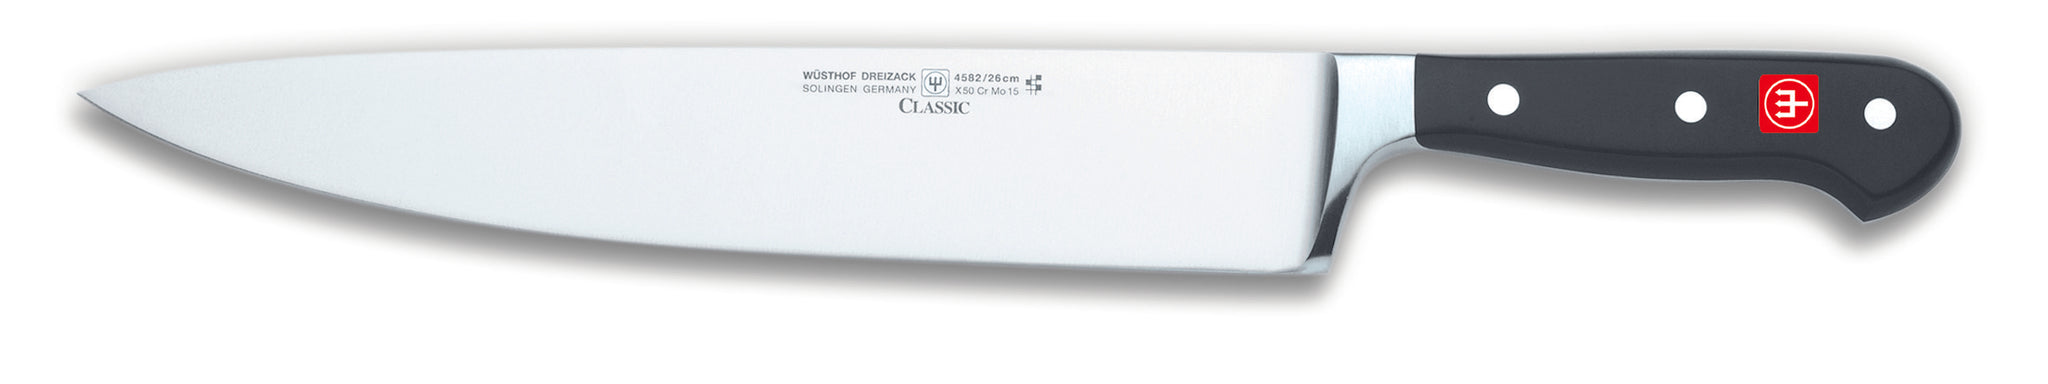 4582-7/26 wusthof classic cooks knife. 10 inches. riveted handle.